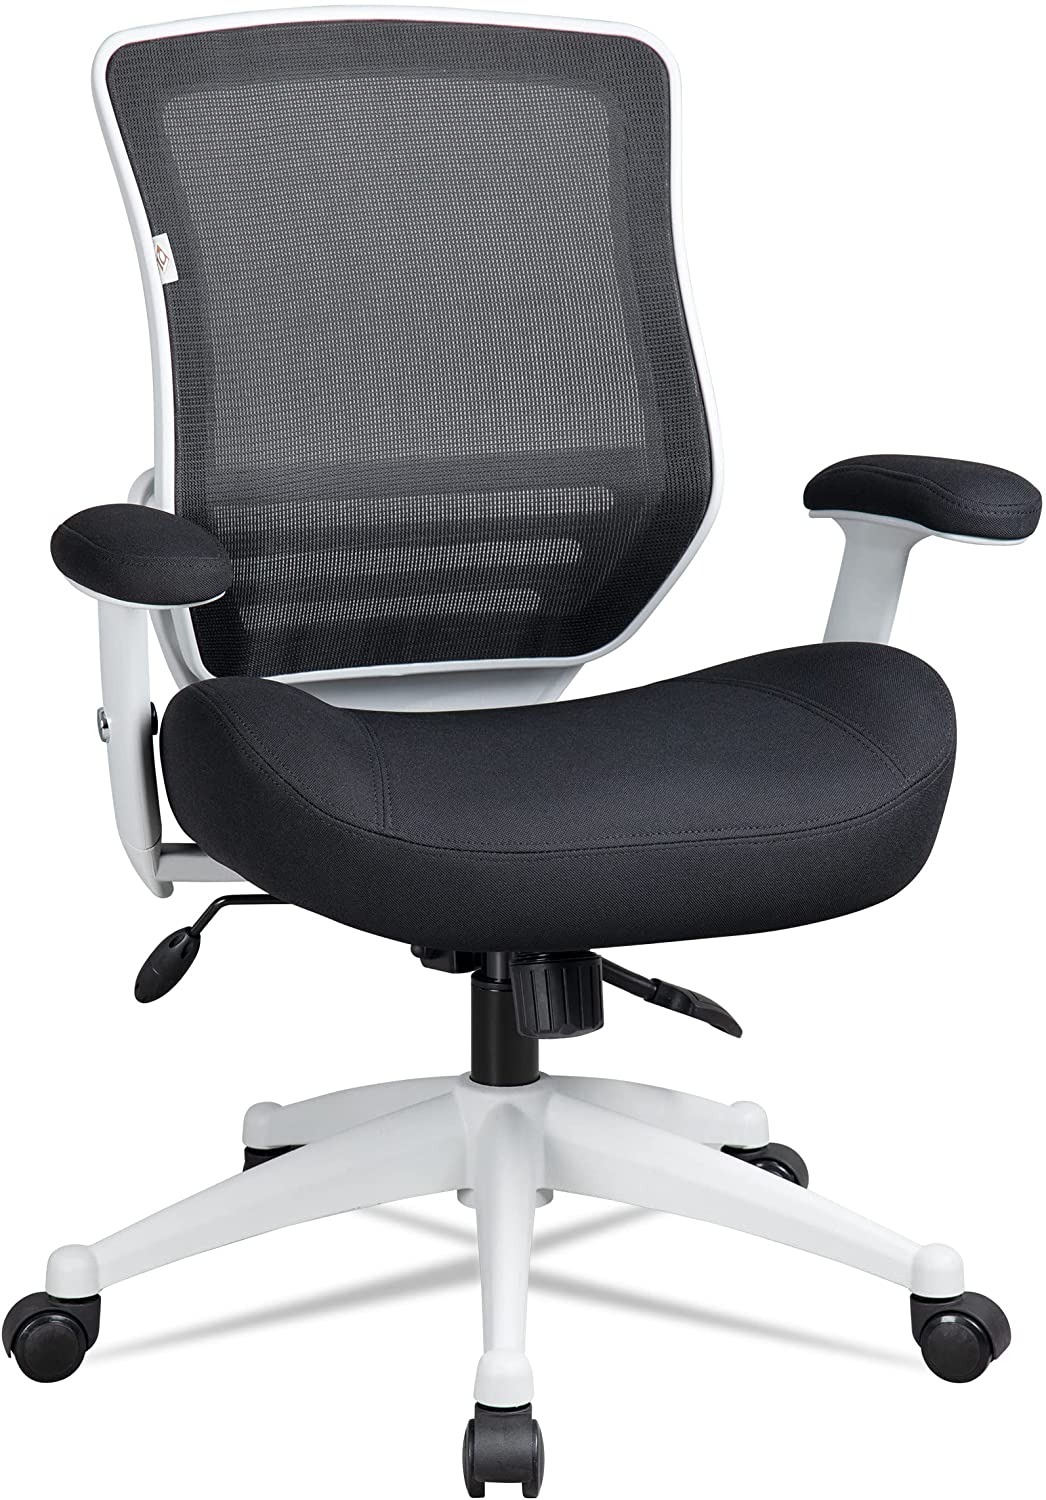 Best Big and Tall Office Chair: Top Picks for 2022